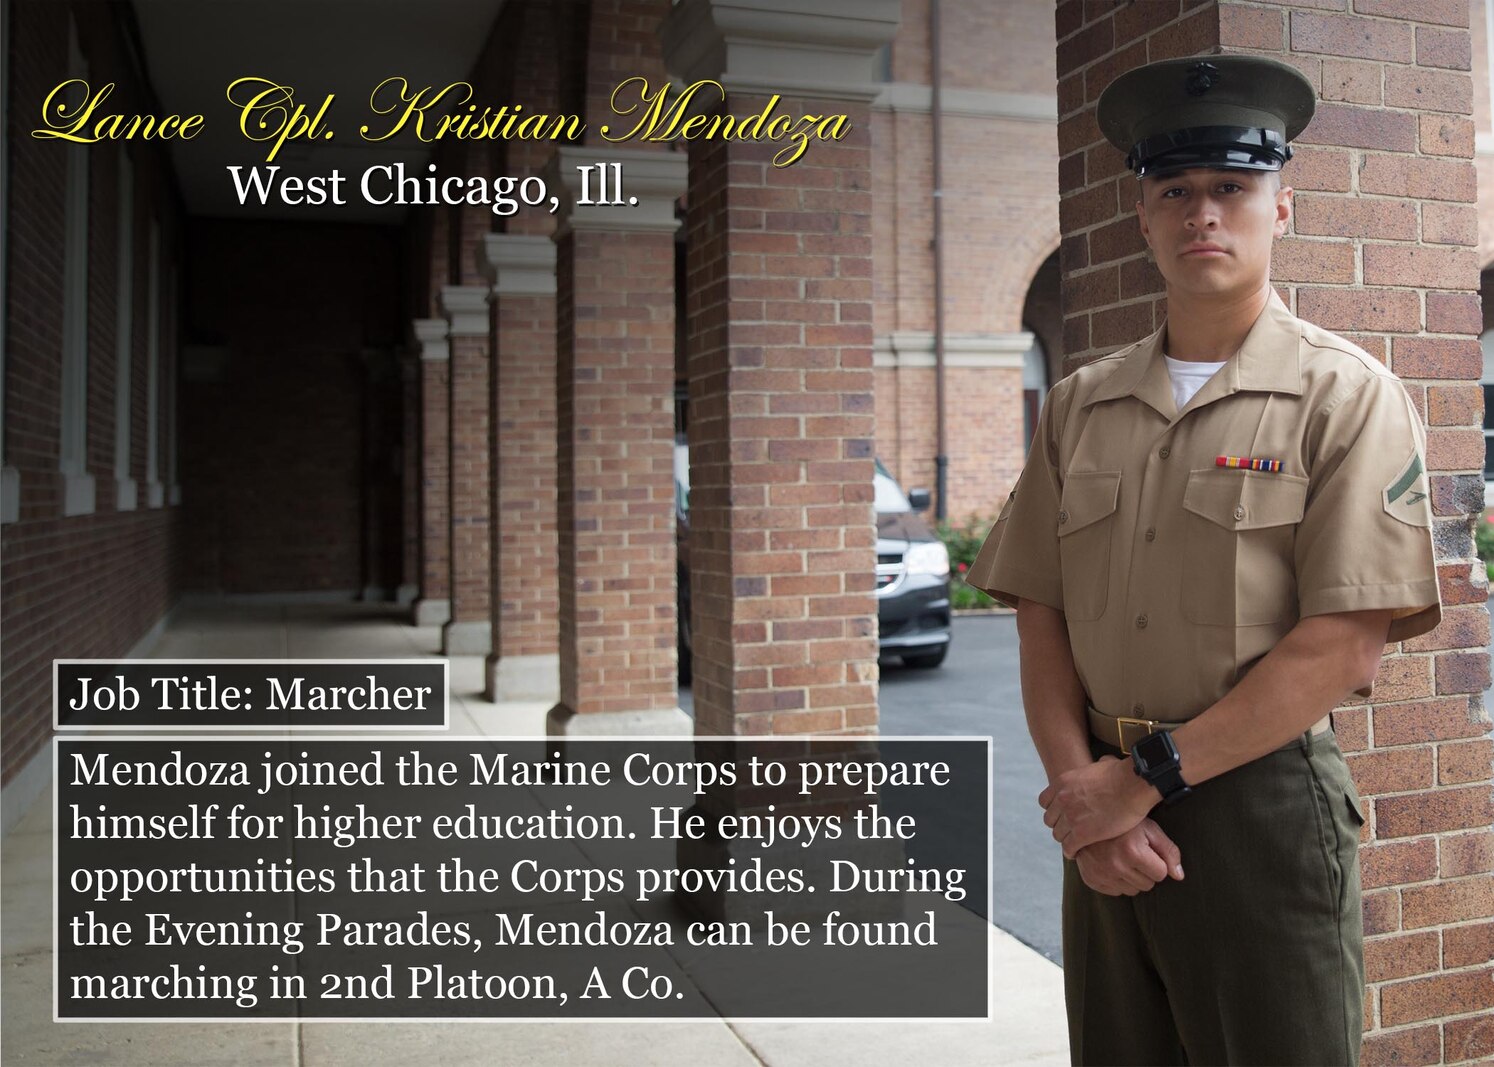 Lance Cpl. Kristian Mendoza
Job Title: Marcher
West Chicago, Ill.
Mendoza joined the Marine Corps to prepare himself for higher education. He enjoys the opportunities that the Corps provides. During the Evening Parades, Mendoza can be found marching in 2nd Platoon, A Co.
(Official Marine Corps graphic by Cpl. Chi Nguyen/Released)